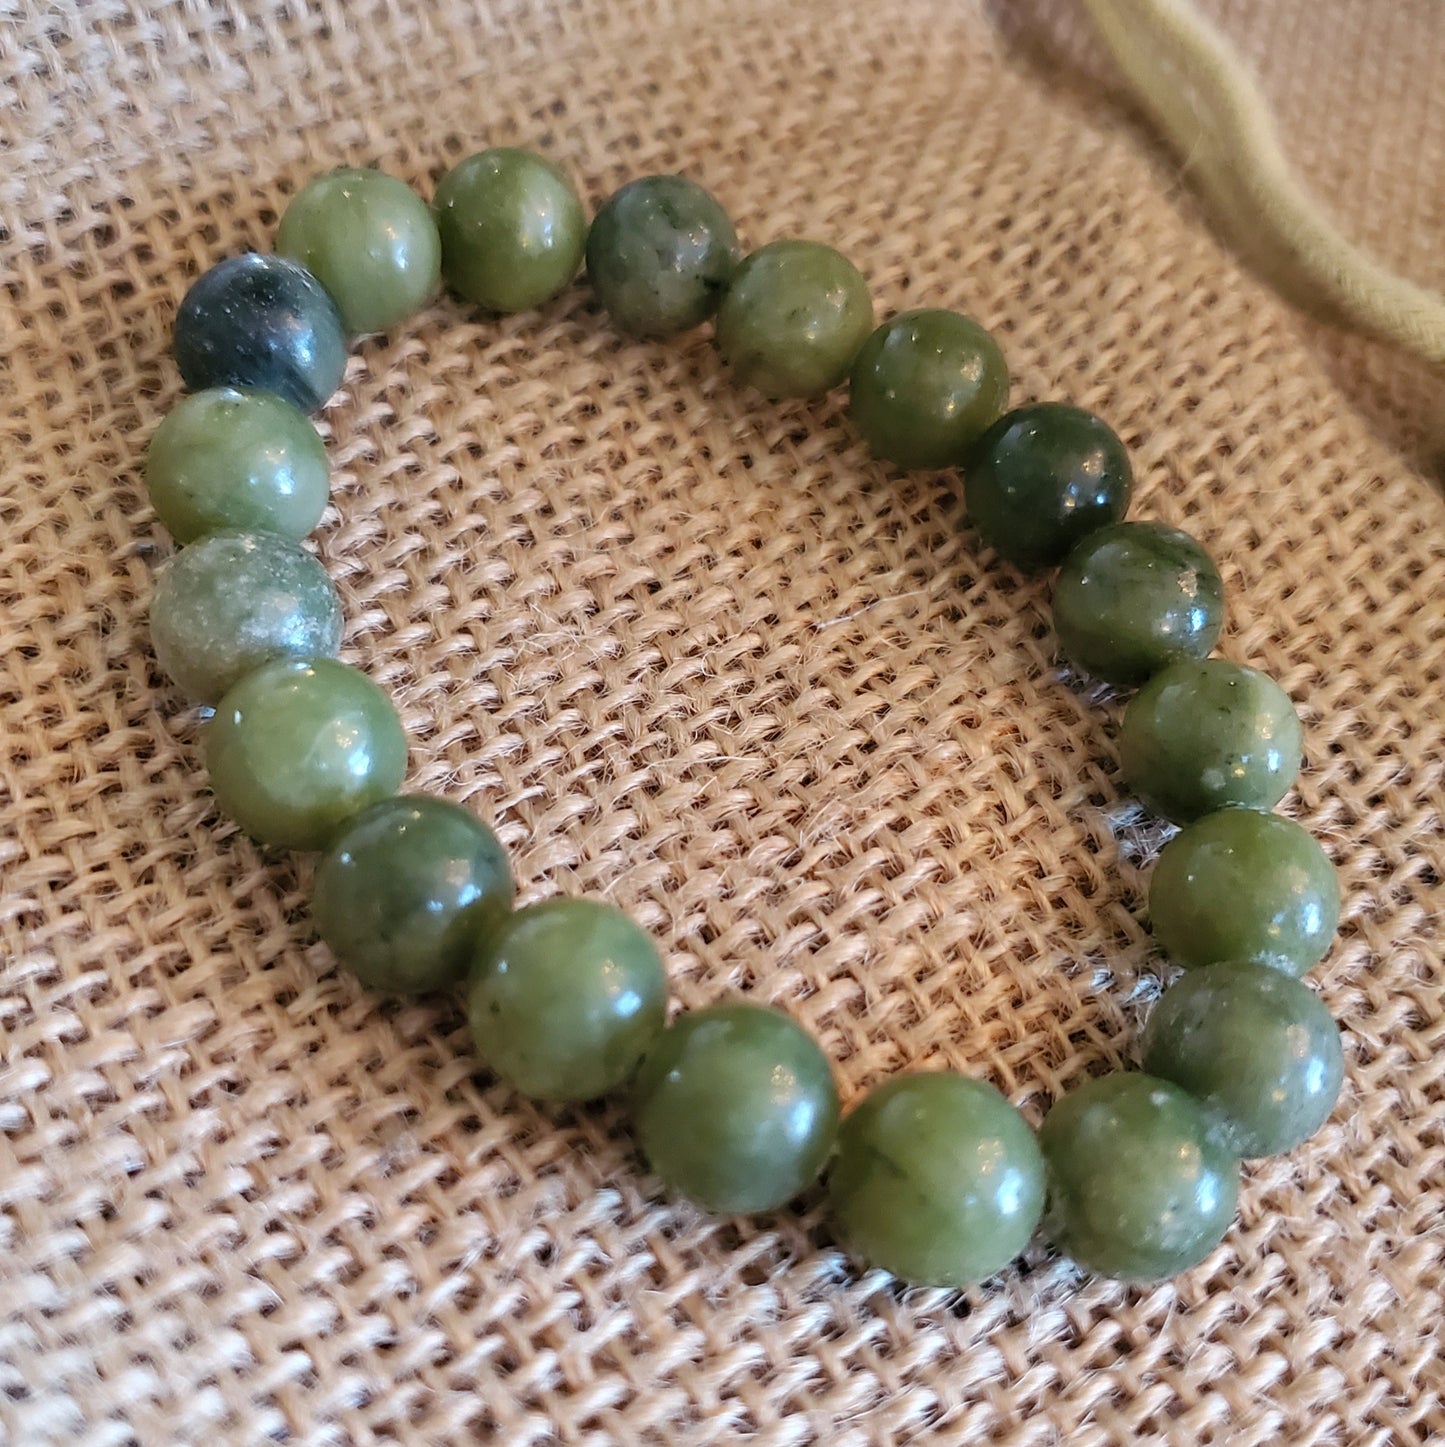 Genuine Jade bracelet bought here locally in Southern California.